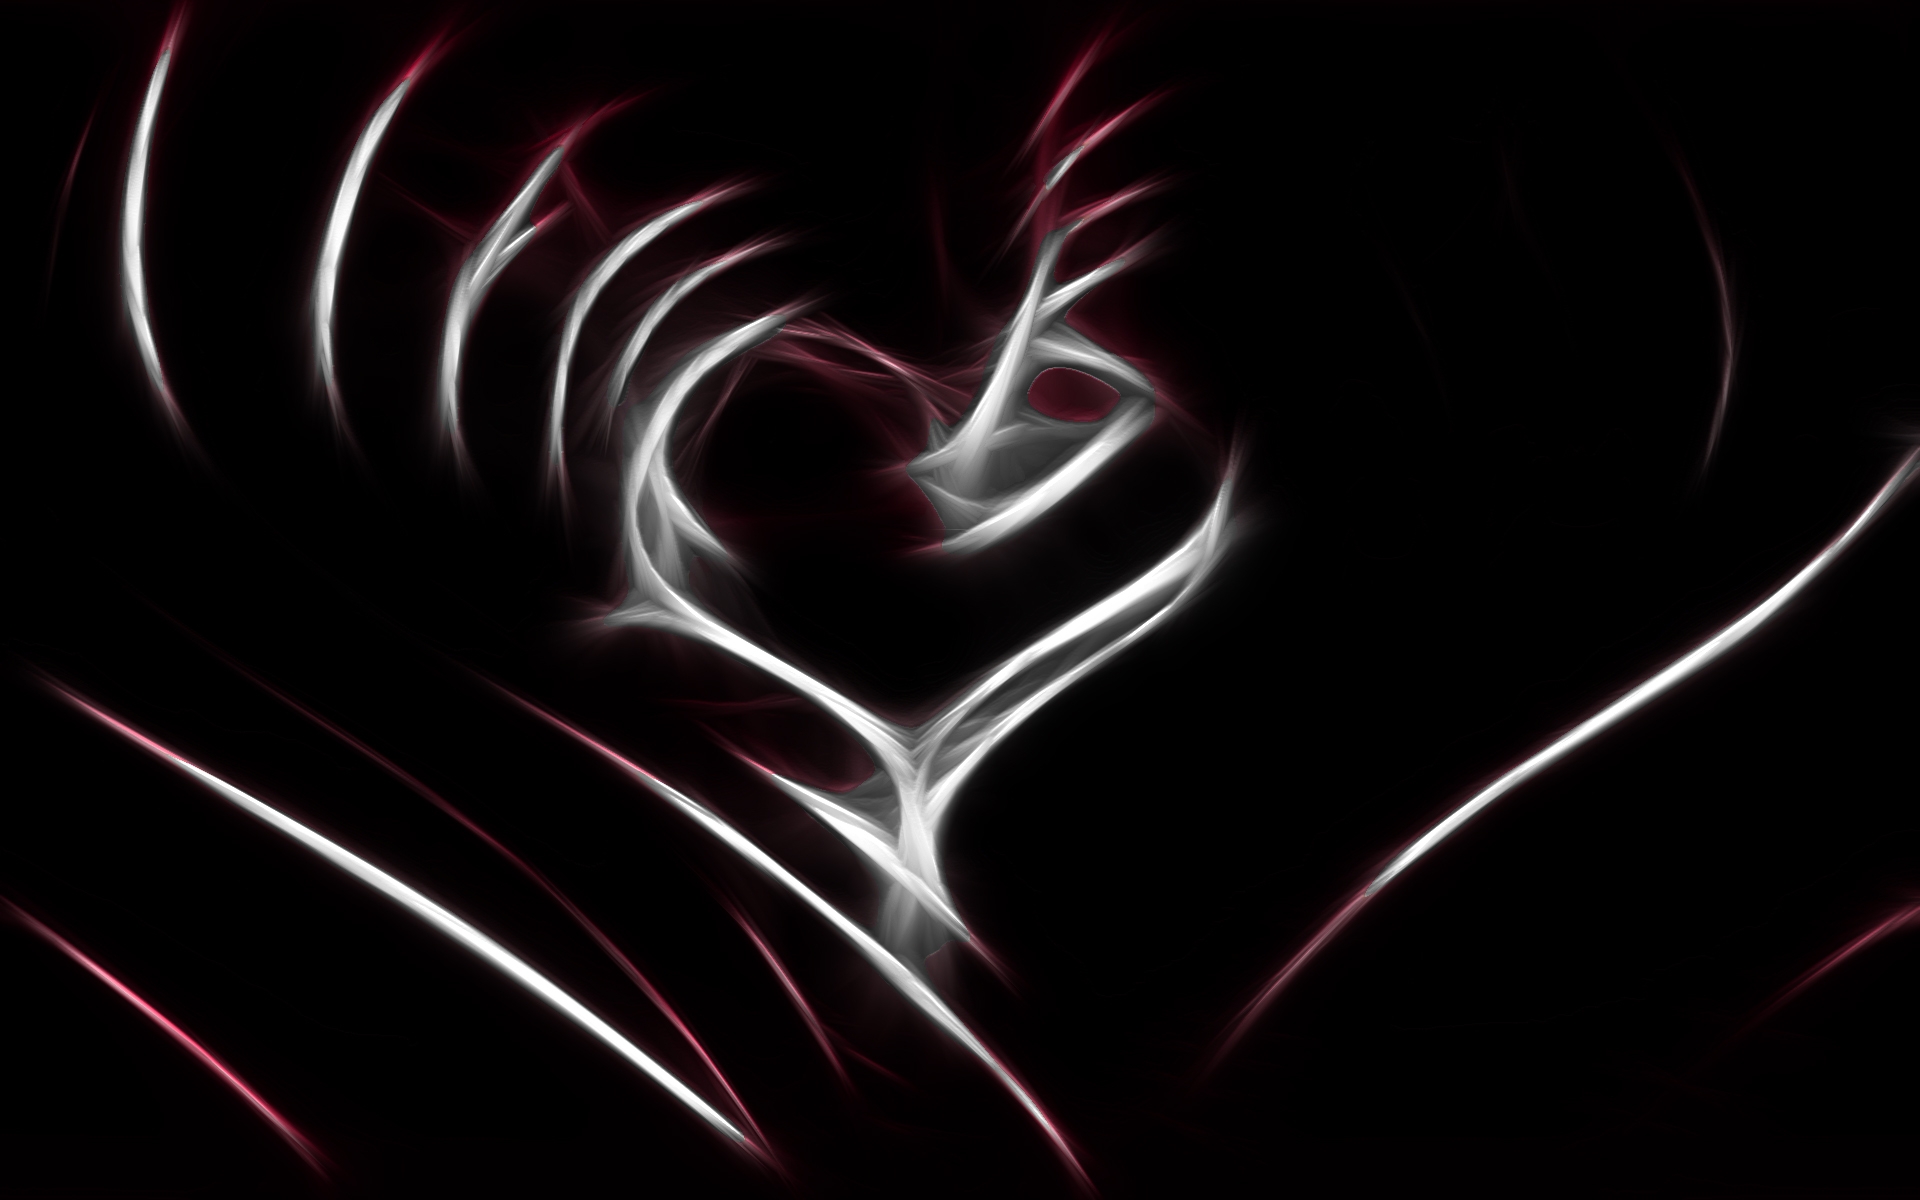  Abstract Heart Line White Red Black Wallpaper Background